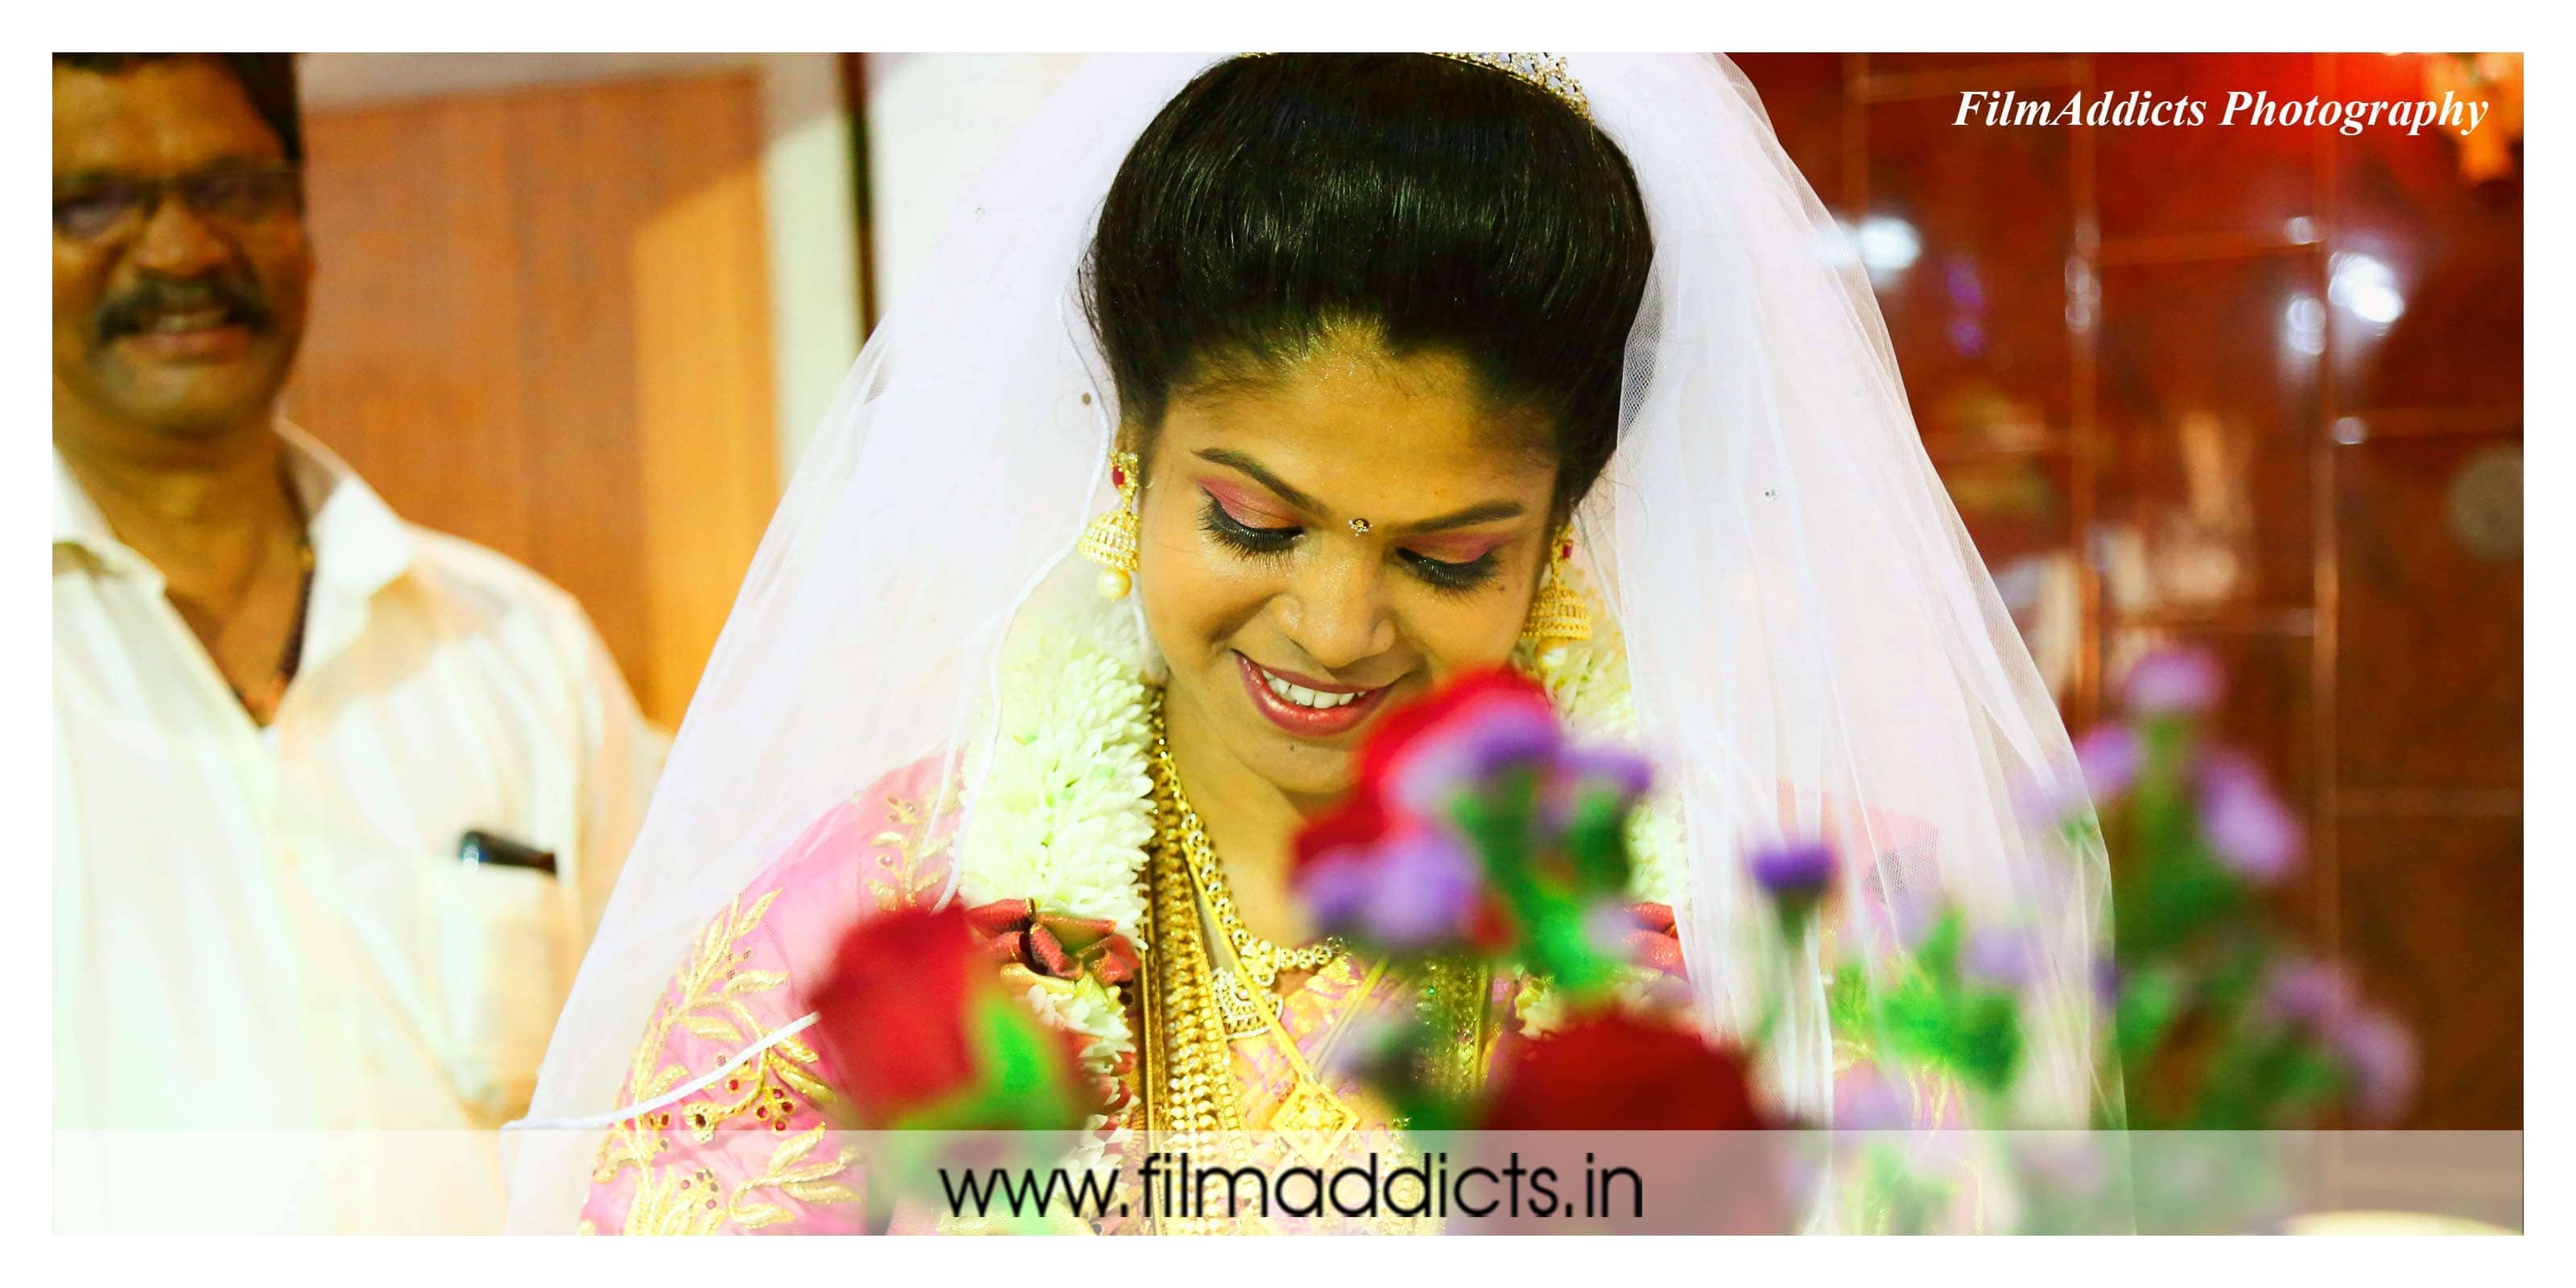 Best-Candid-Photo-in-theni, best-candid-Photo-in-theni,best-candid-Photo-in-theni,Best Candid Wedding Photographer in Theni,Best Candid Wedding Photographer in Theni,creative-wedding-Photo-in-theni,creative-candid-Photo-in-theni